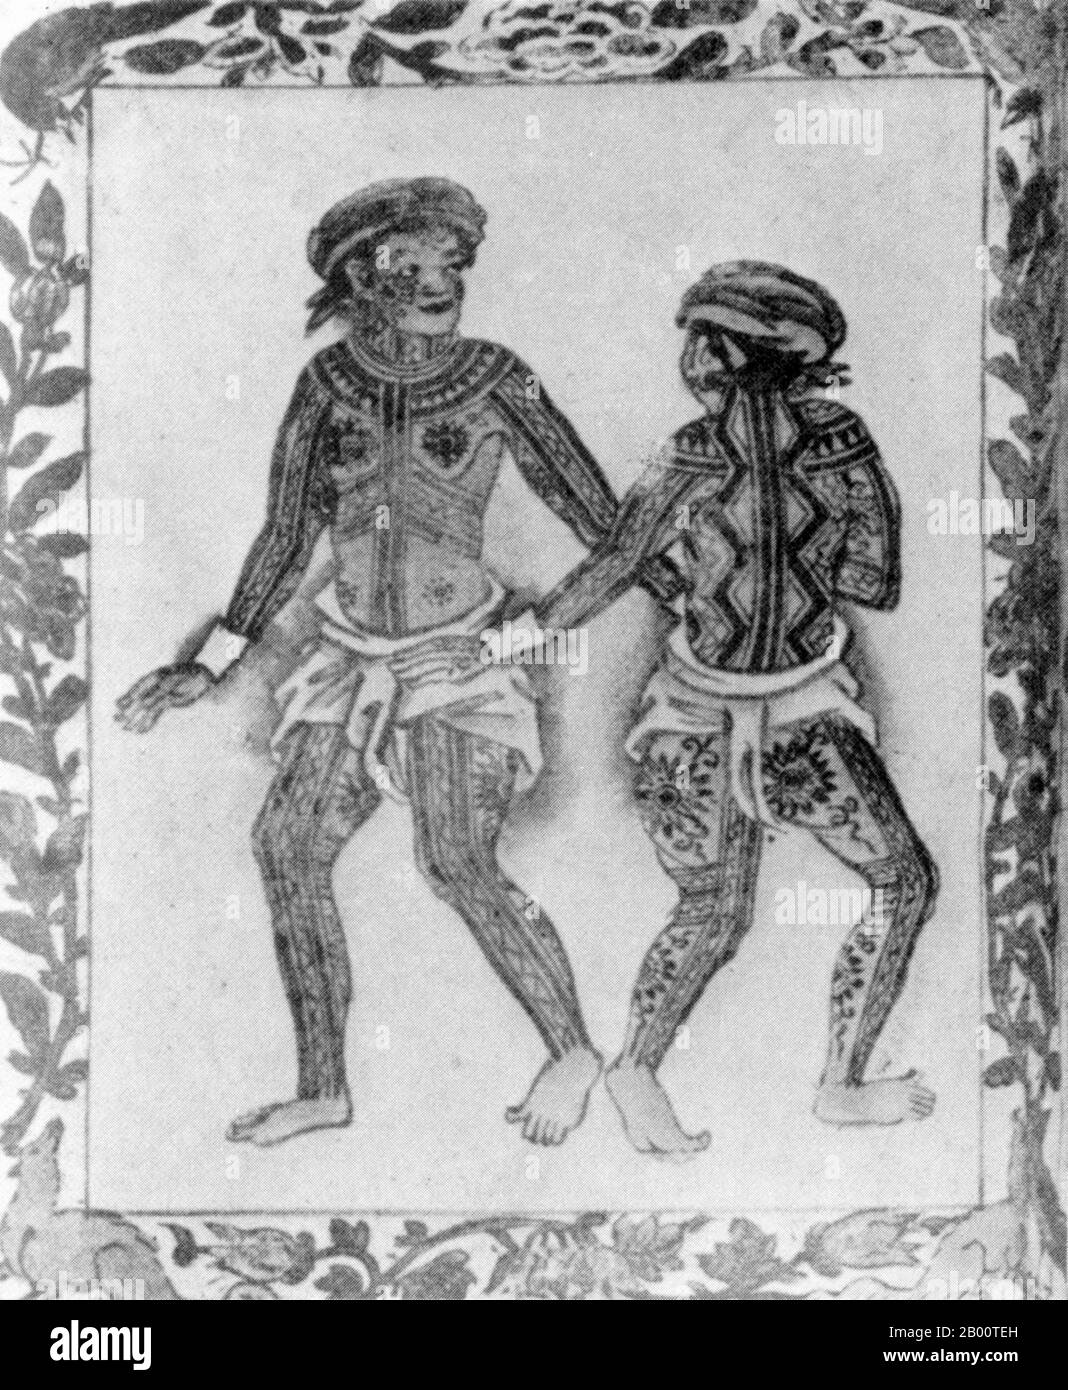 Philippines: An image dated to around 1590 depicting two tattooed persons in the Visayan Islands.  Body tattooing was an important rite of passage for men in the Visayas and was often related to head-hunting or heroism. At festivals, wrestlers wore loincloths to expose their tattoos making them appear more fierce and entreating protection from the spirit world. The first Europeans in the Philippines referred to the Visayans as ‘Los Pintados’, meaning ‘The Painted Ones’. Stock Photo